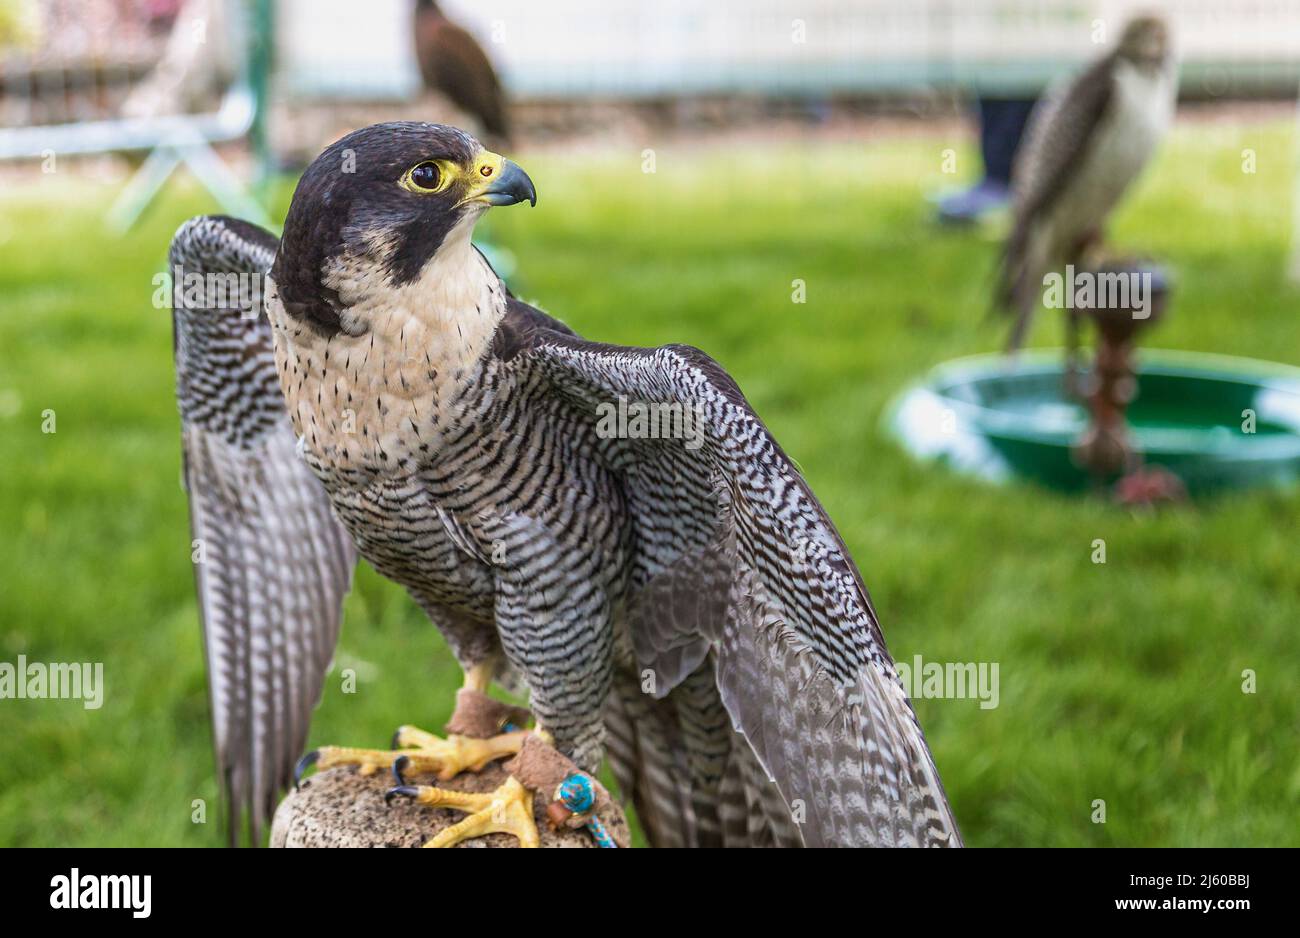 A Peregrine Falcon on a perch stretching it's wings before being flown at a falconry display. Stock Photo